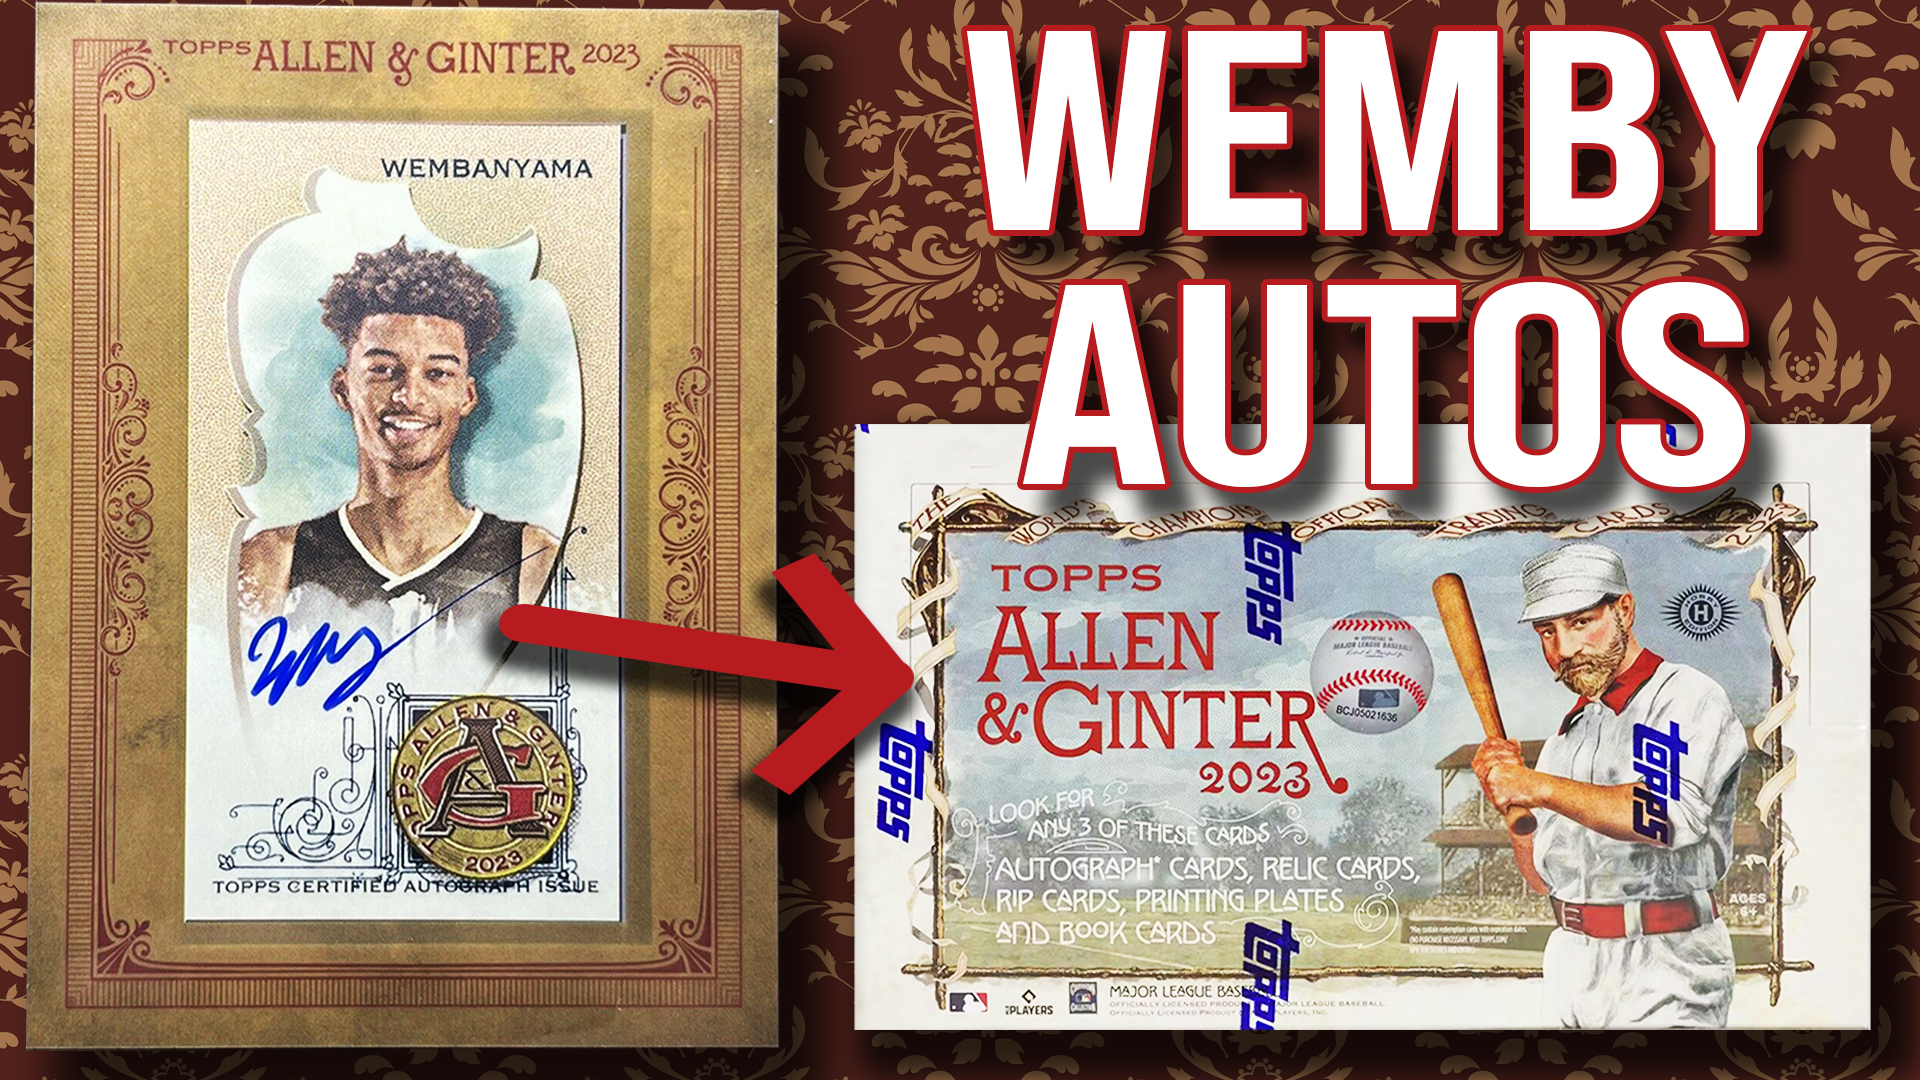 PLUS - Check out our latest YouTube Video that just dropped on Victor Wembanyama in 2023 Topps Allen & Ginter!